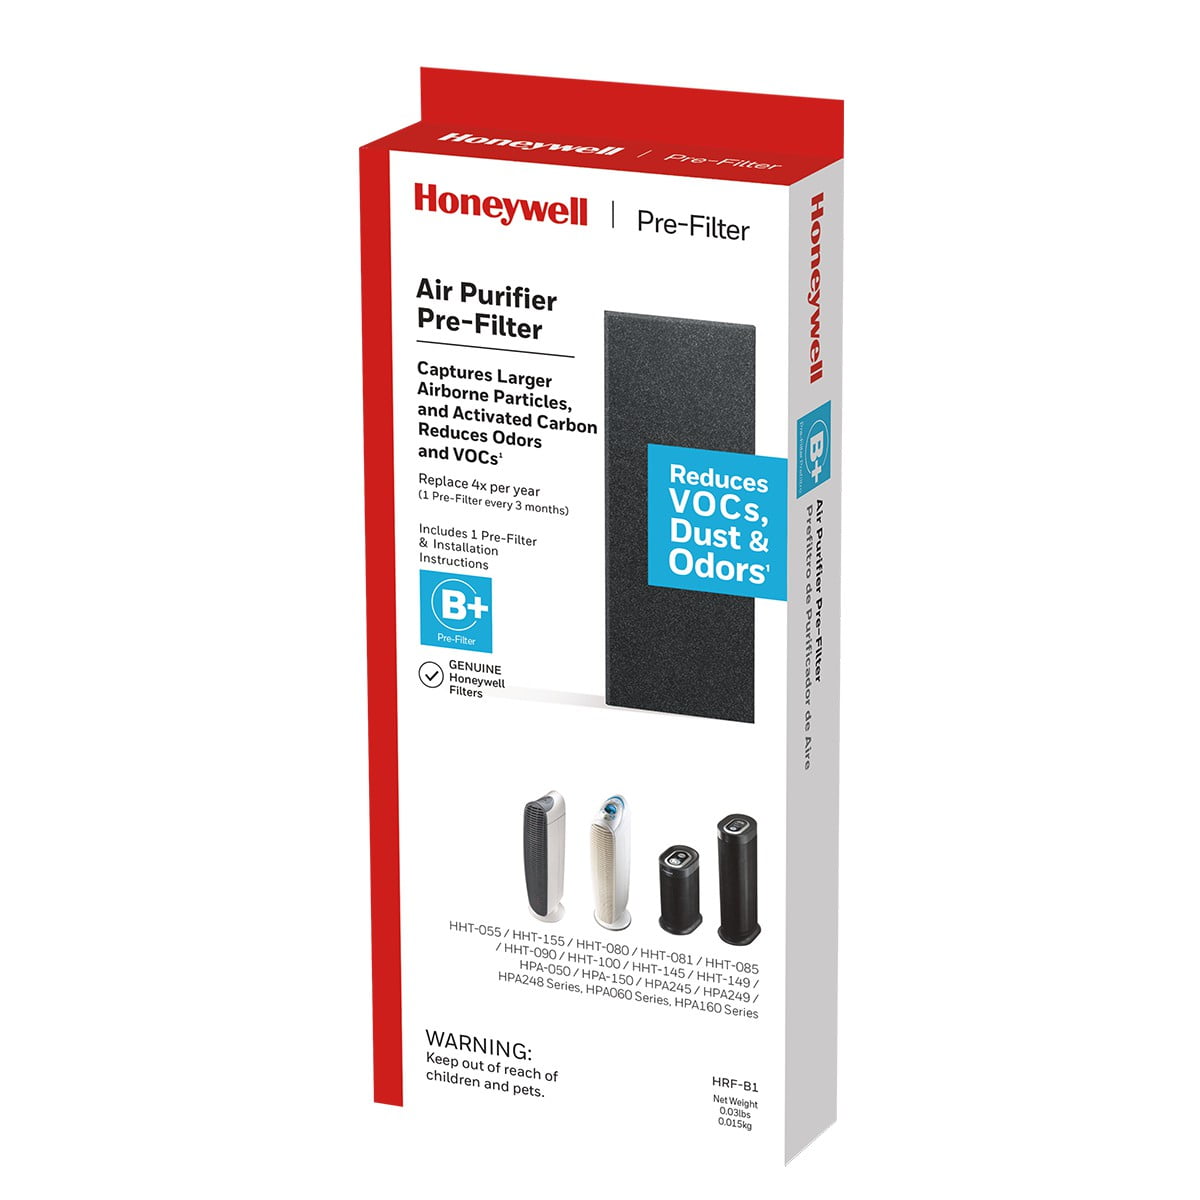 HPA250B HPA-250B HRF-APP1 Honeywell Blue Tooth Air Purifier White Black with Bluetooth with Household Odor & Gas Reducing Universal Pre-Filter Black and AllergnRemv Filter 